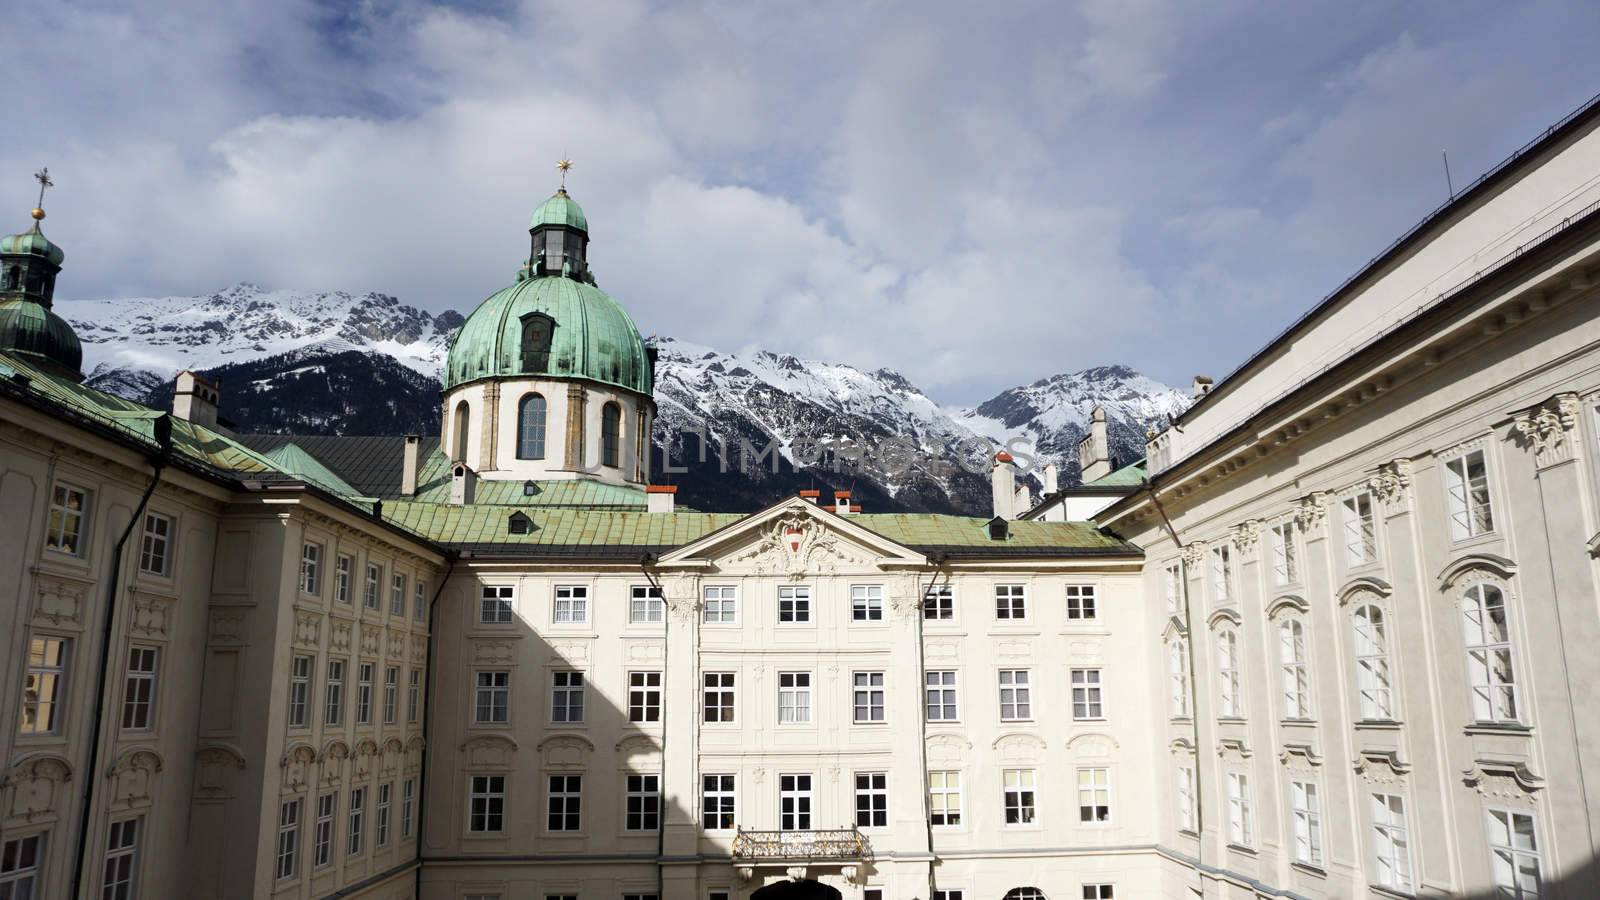 hofburg palace with snow mountains background by polarbearstudio